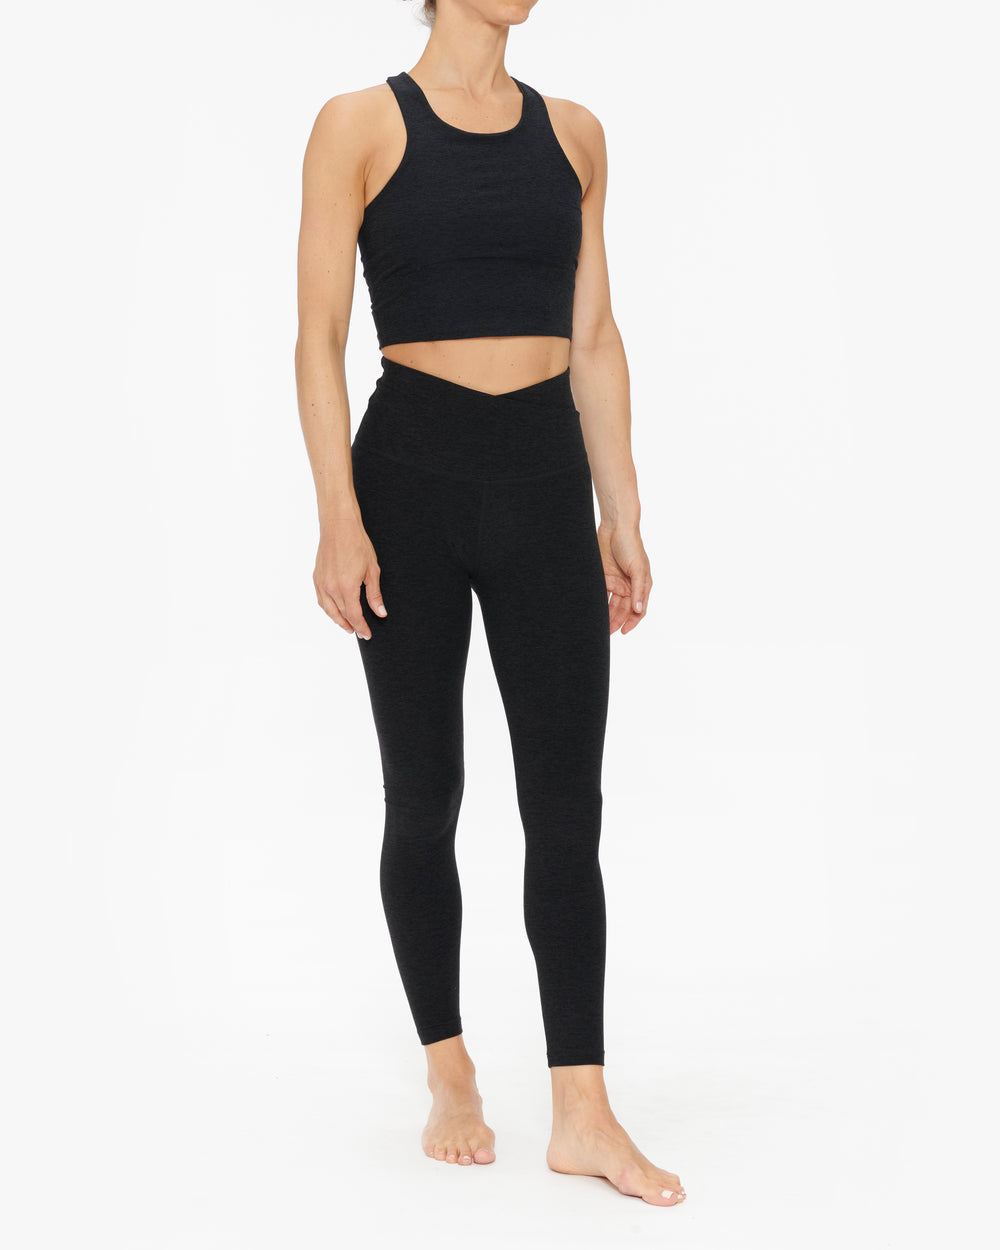 BEYOND YOGA AT YOUR LEISURE HIGH WAISTED LEGGING